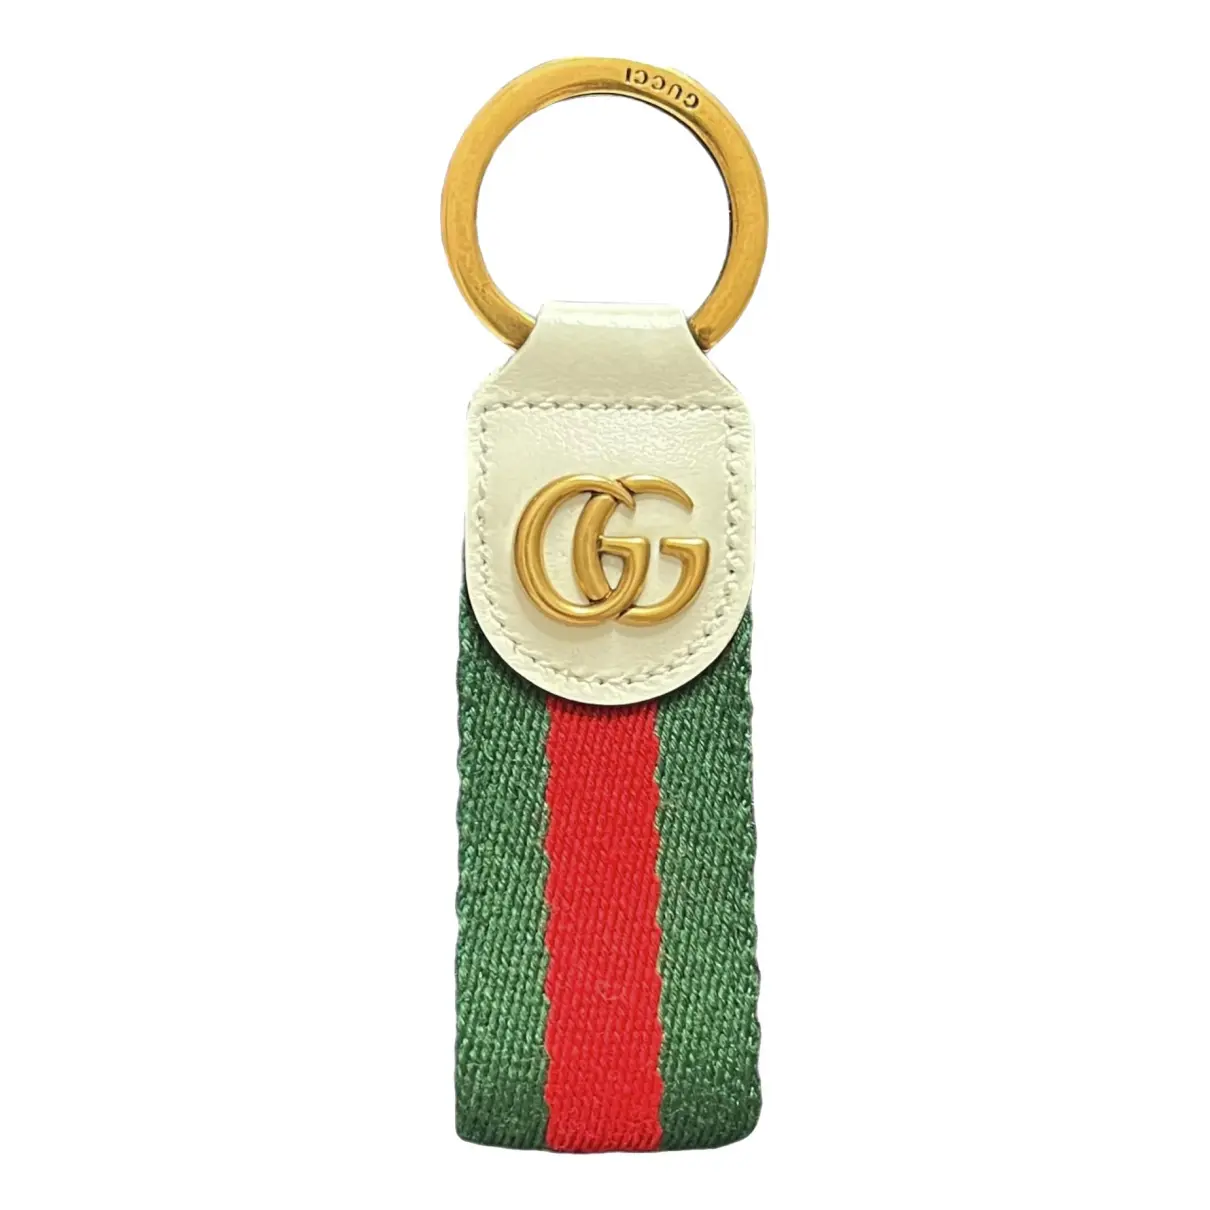 Marmont leather key ring